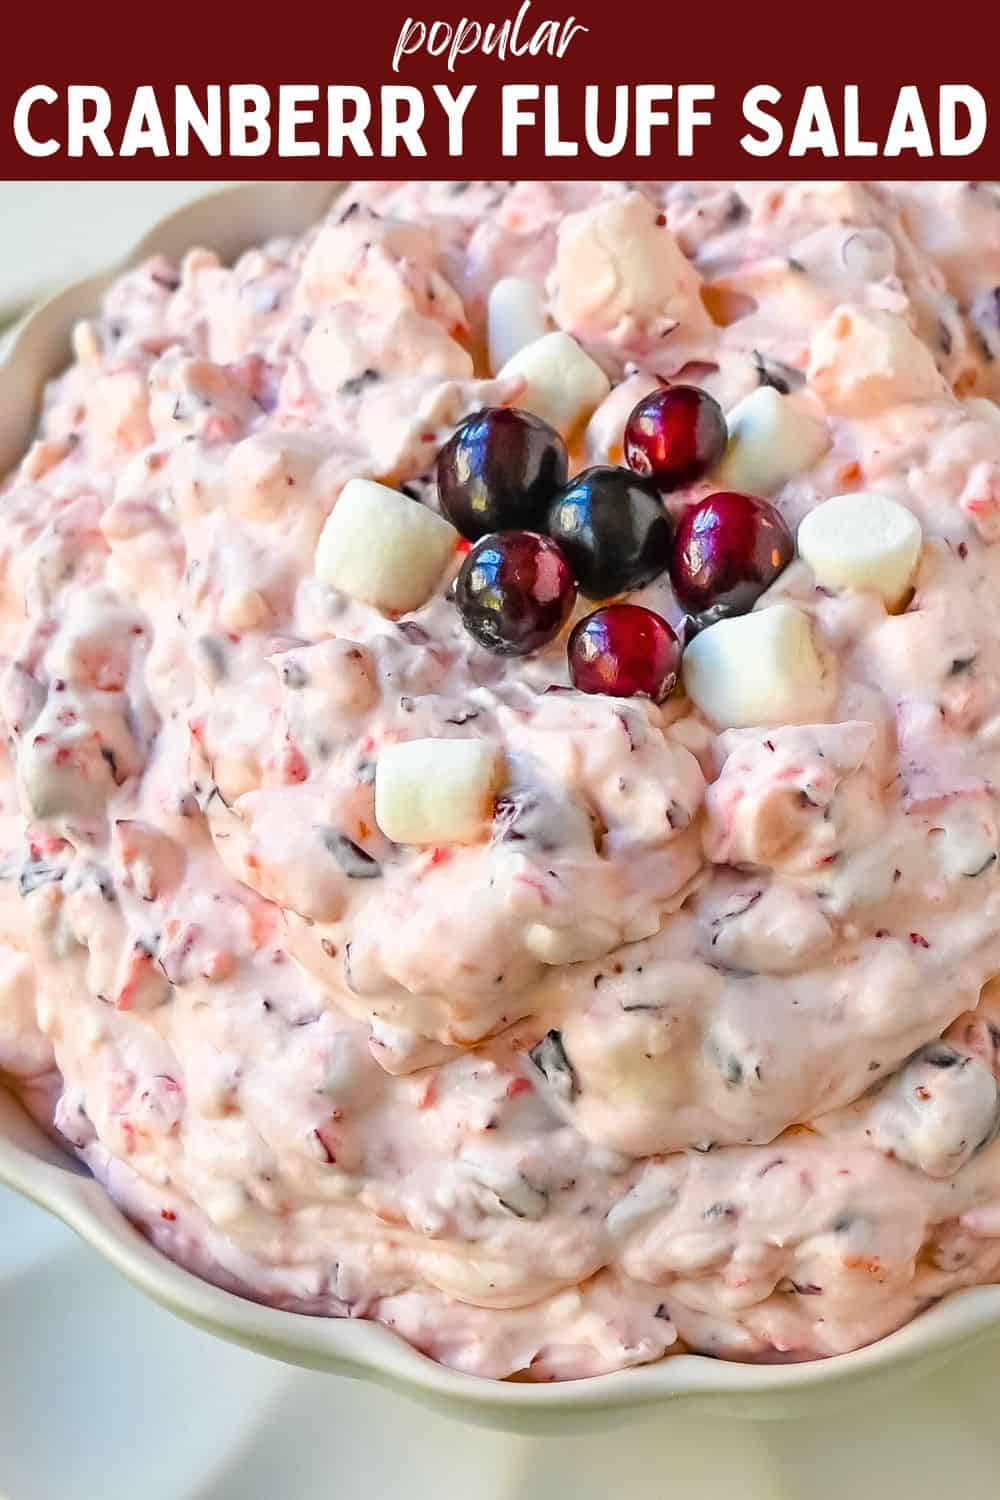 Cranberry Fluff Salad. This is such a popular holiday side dish! This easy cranberry salad is made with fresh cranberries, fresh pineapple, mini marshmallows, cream cheese, sugar, and fresh whipped cream. Perfectly sweet, tart, and creamy. This classic side dish recipe has been modernized and is better than ever!